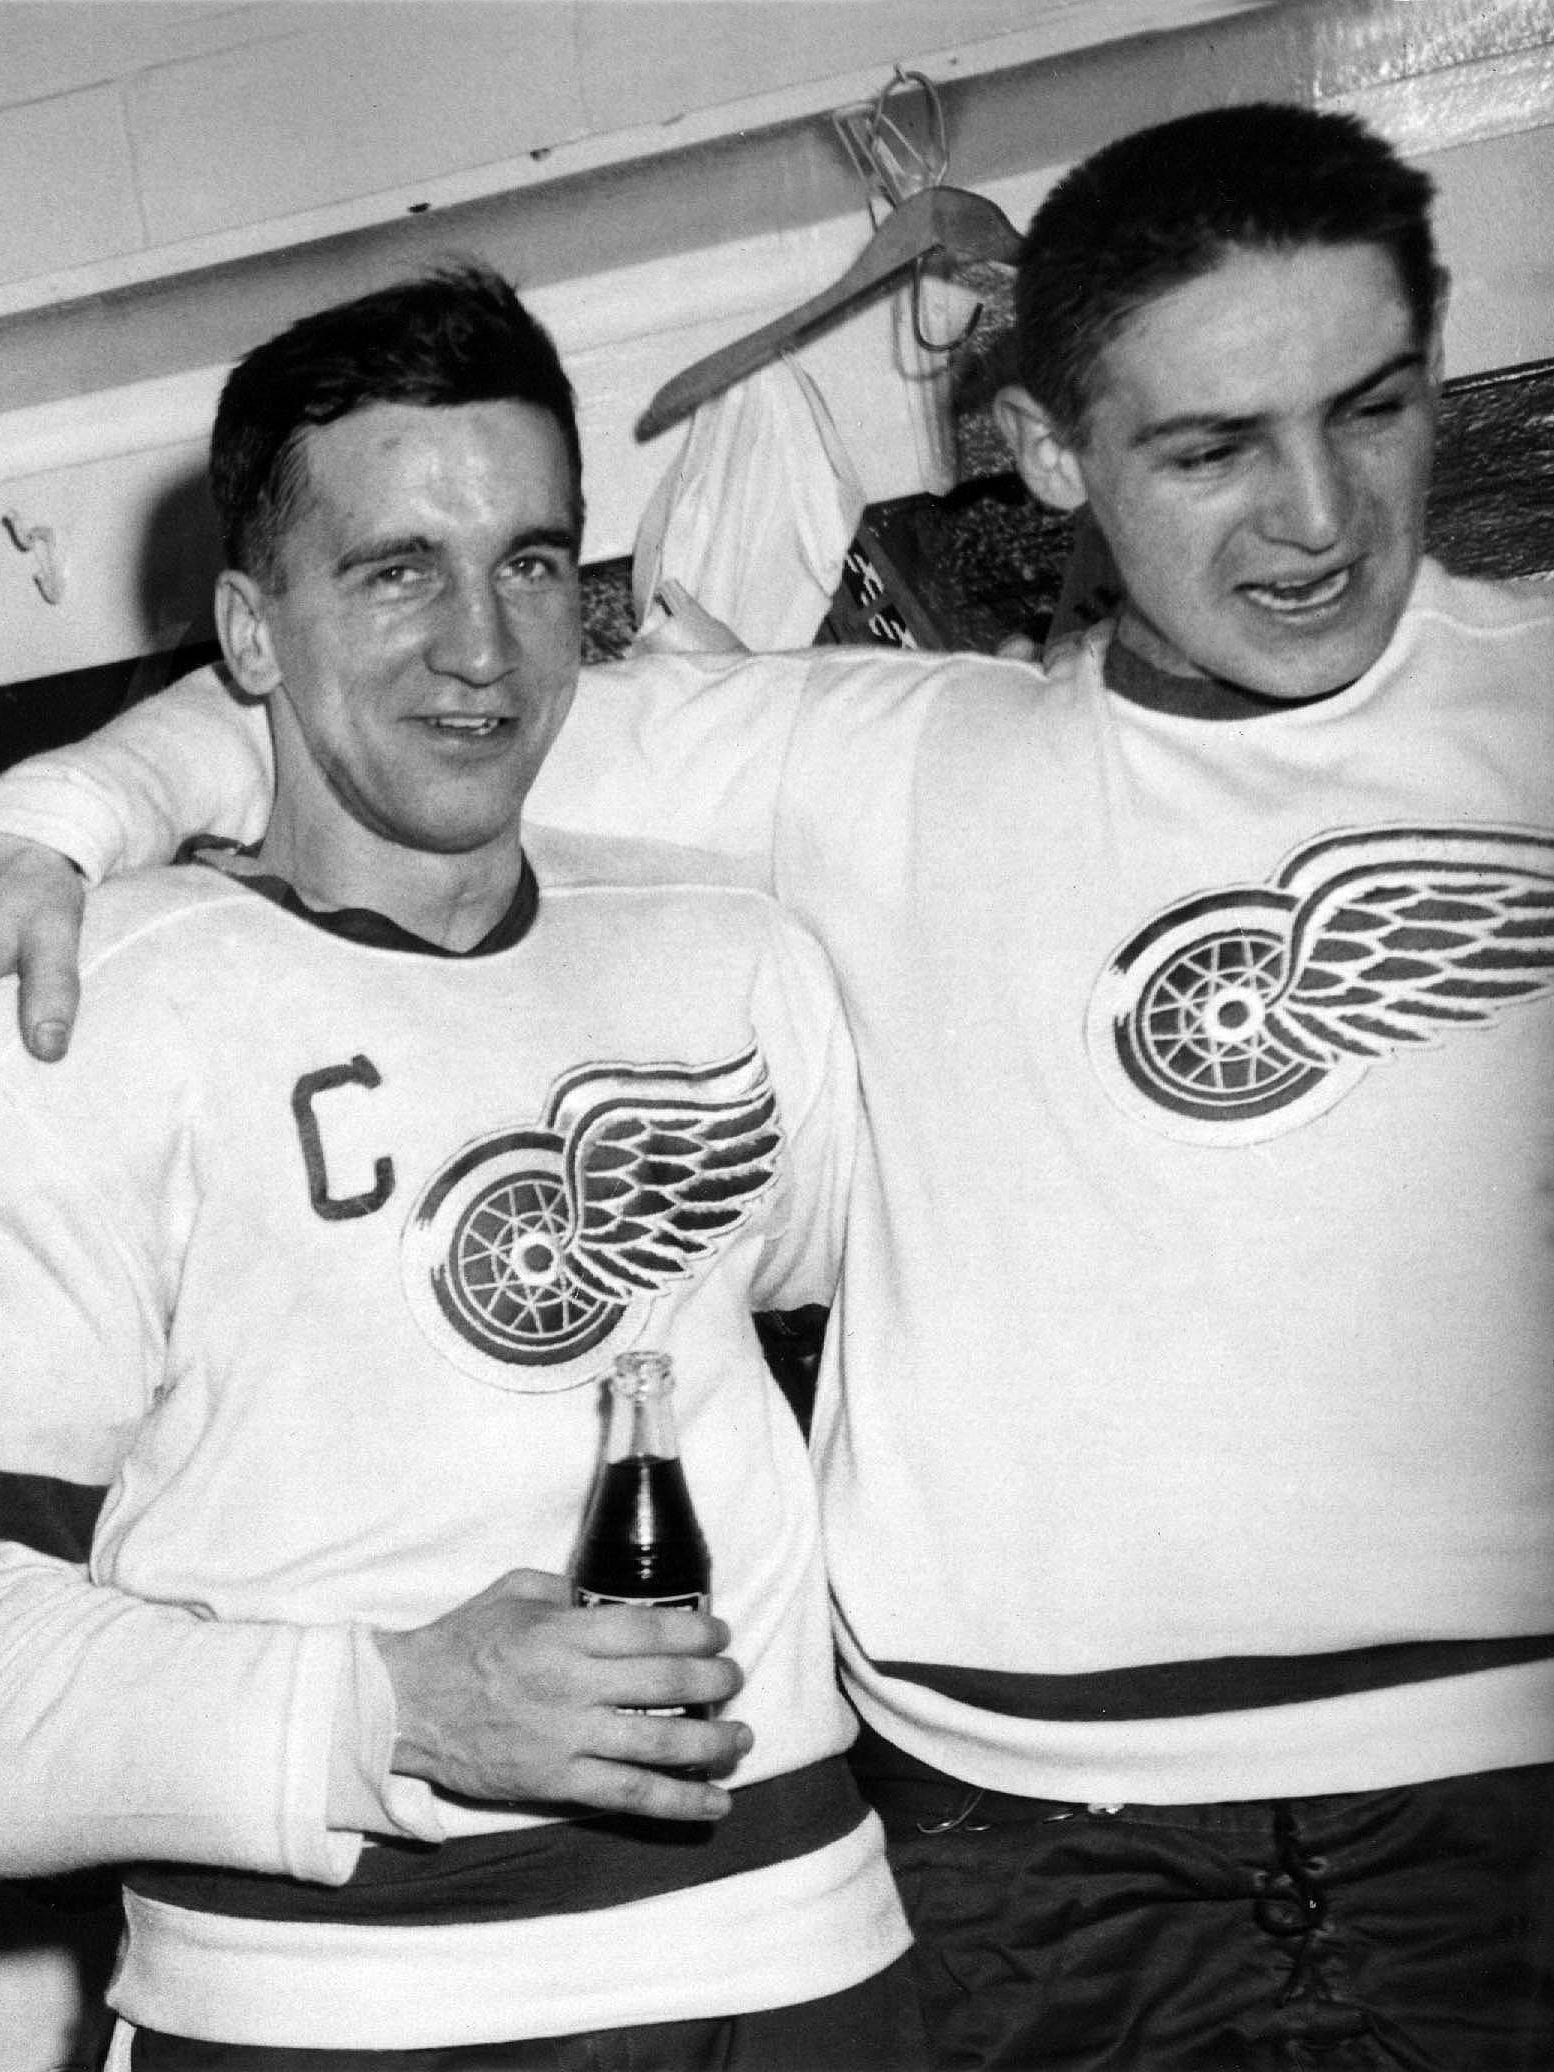 Ted Lindsay of the Detroit Red Wings with Terry Sawchuk, April 1955. Lindsay fought to establish the National Hockey League Players' Association, winning an out-of-court settlement with the NHL in 1958.